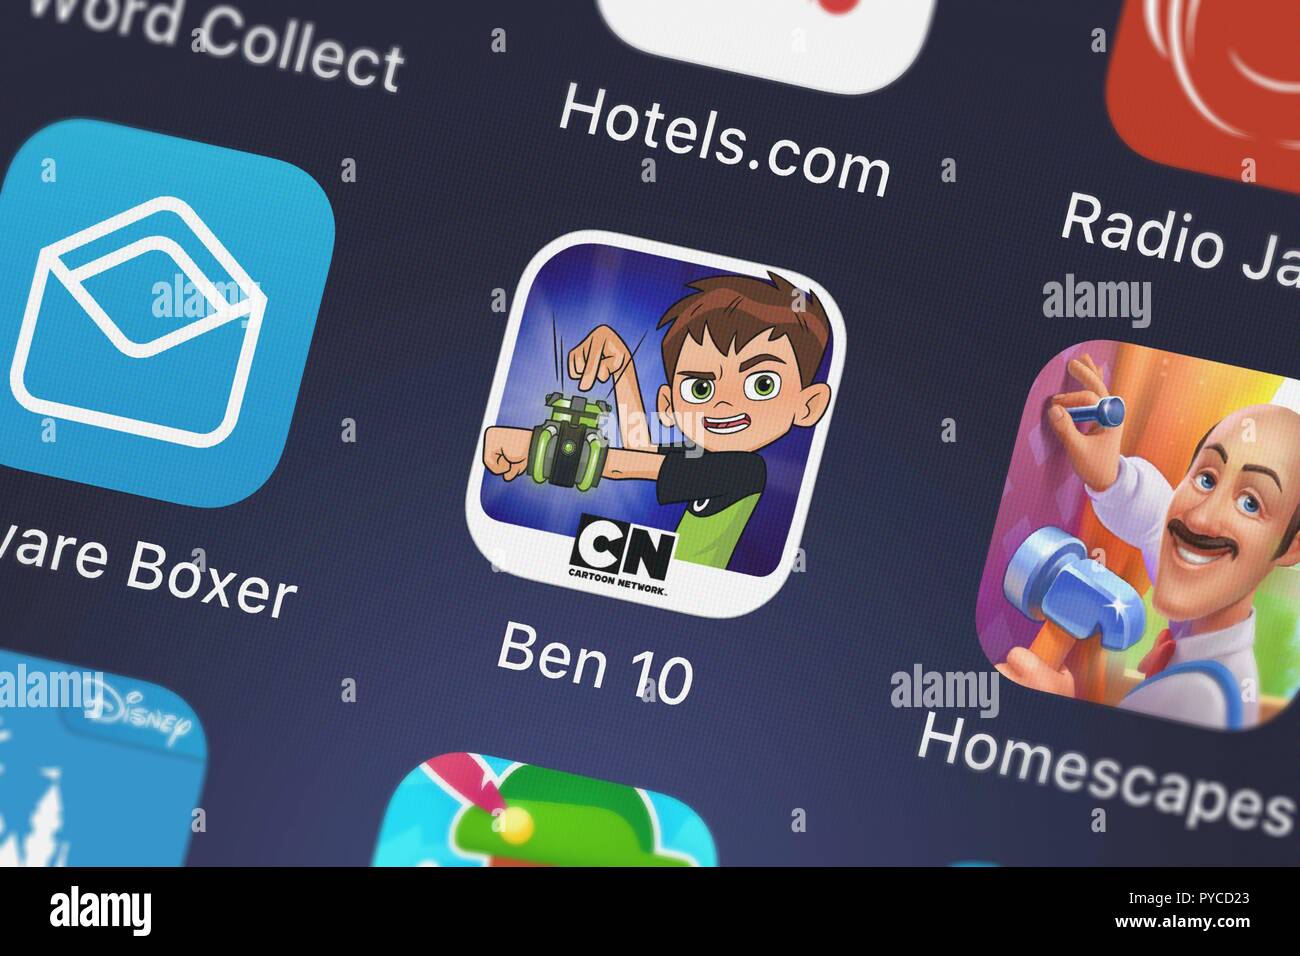 London, United Kingdom - October 26, 2018: Screenshot of the mobile app Ben 10: Alien Experience from Cartoon Network. Stock Photo